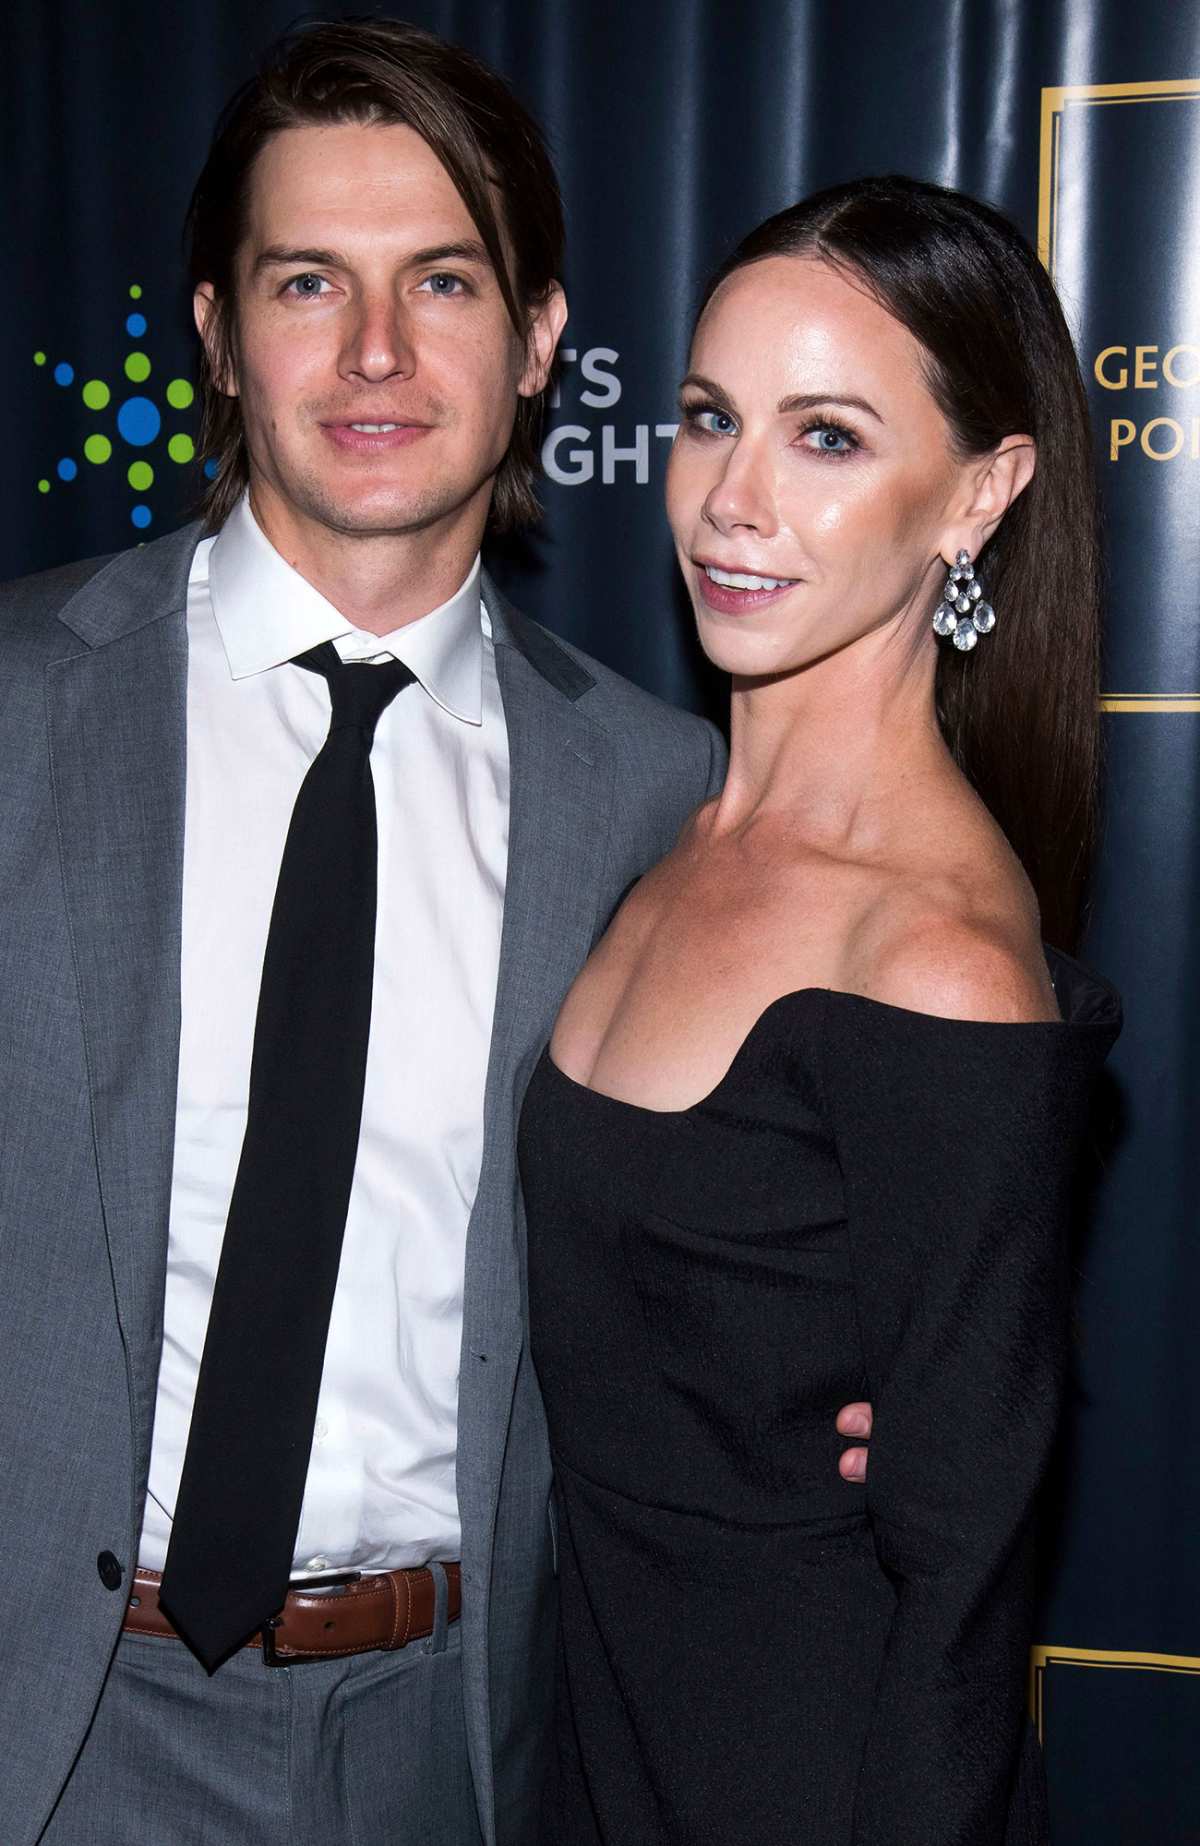 Celebrity Baby News: Kevin and Kristen Michell